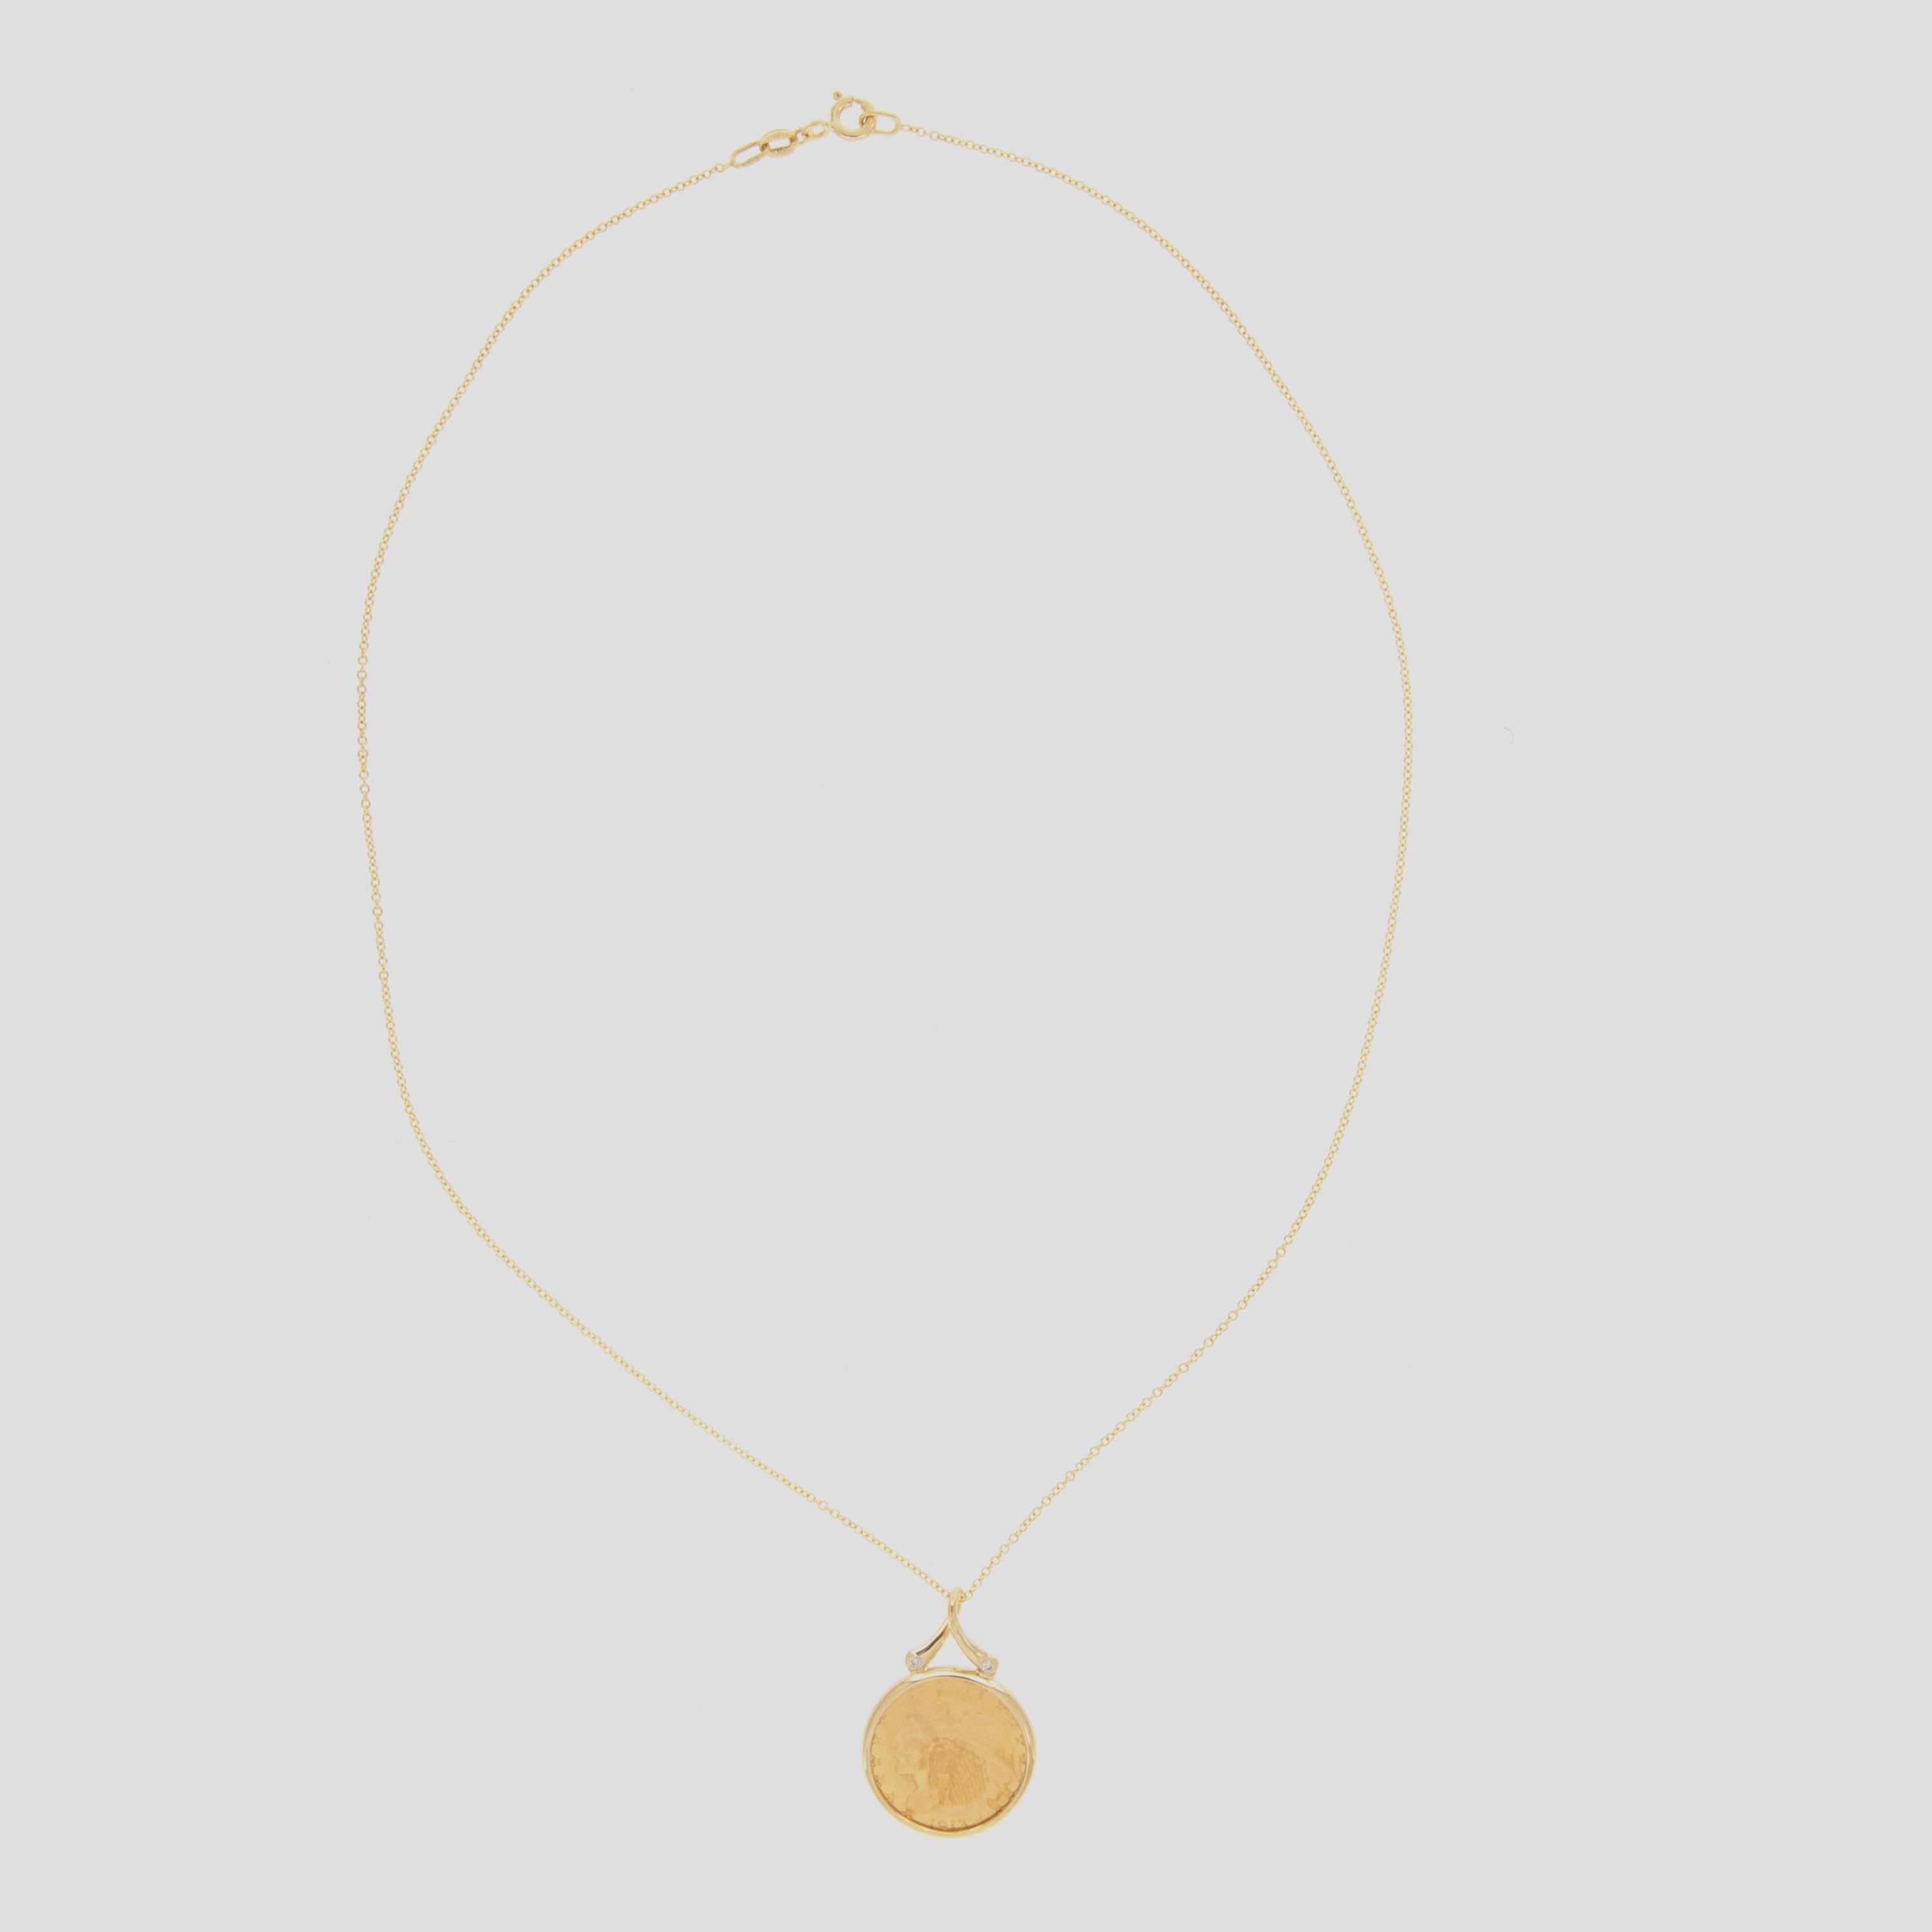 18k gold coin necklace